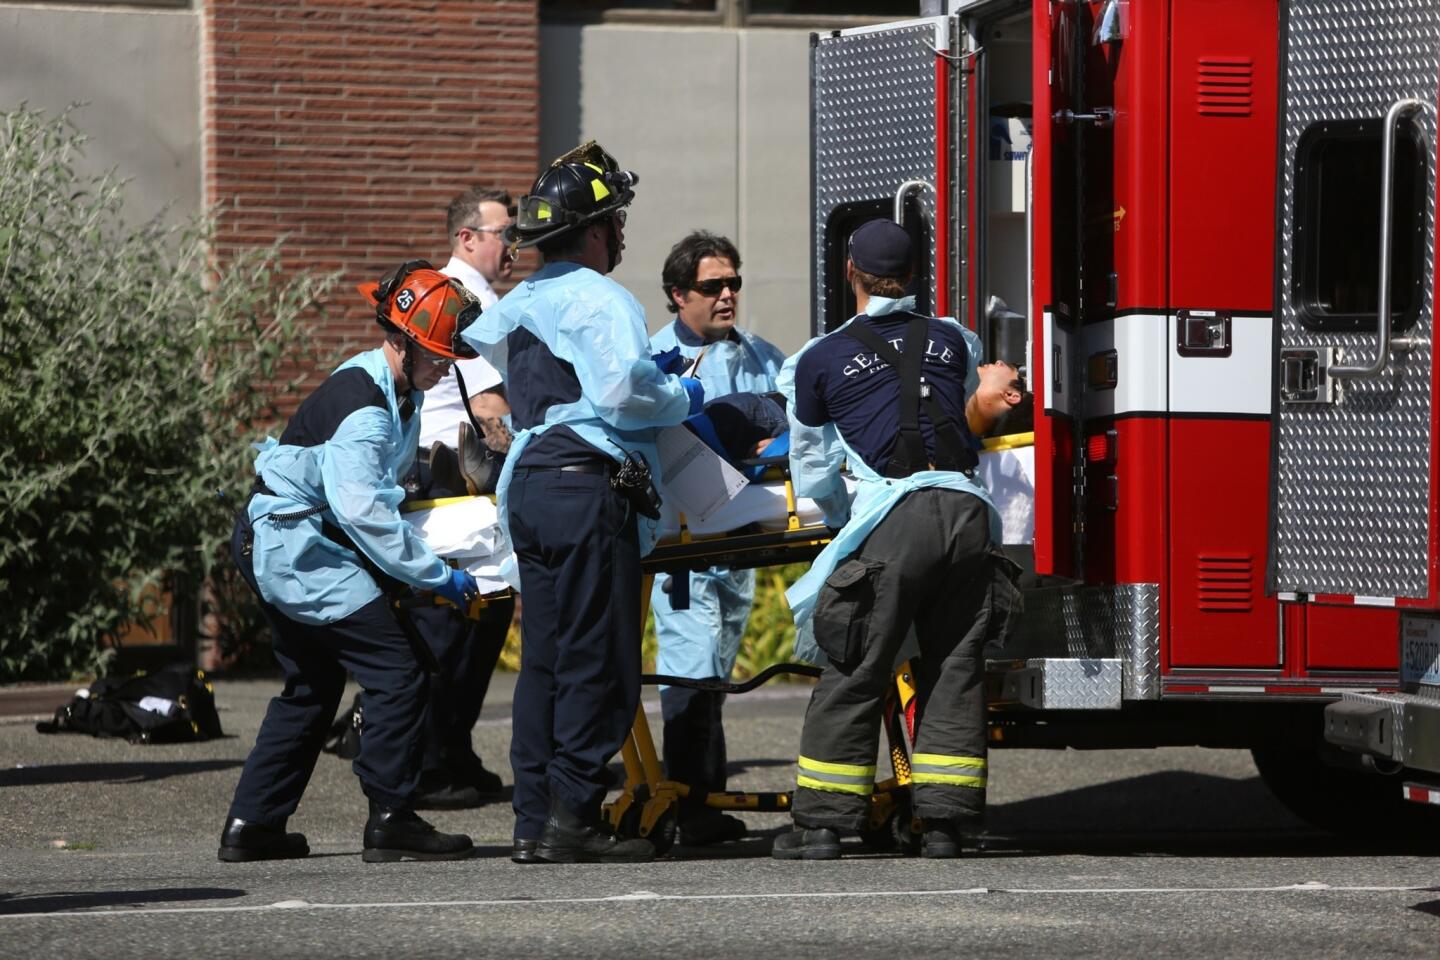 Firefighters remove a victim from the scene of a shooting at Seattle Pacific University on June 5.